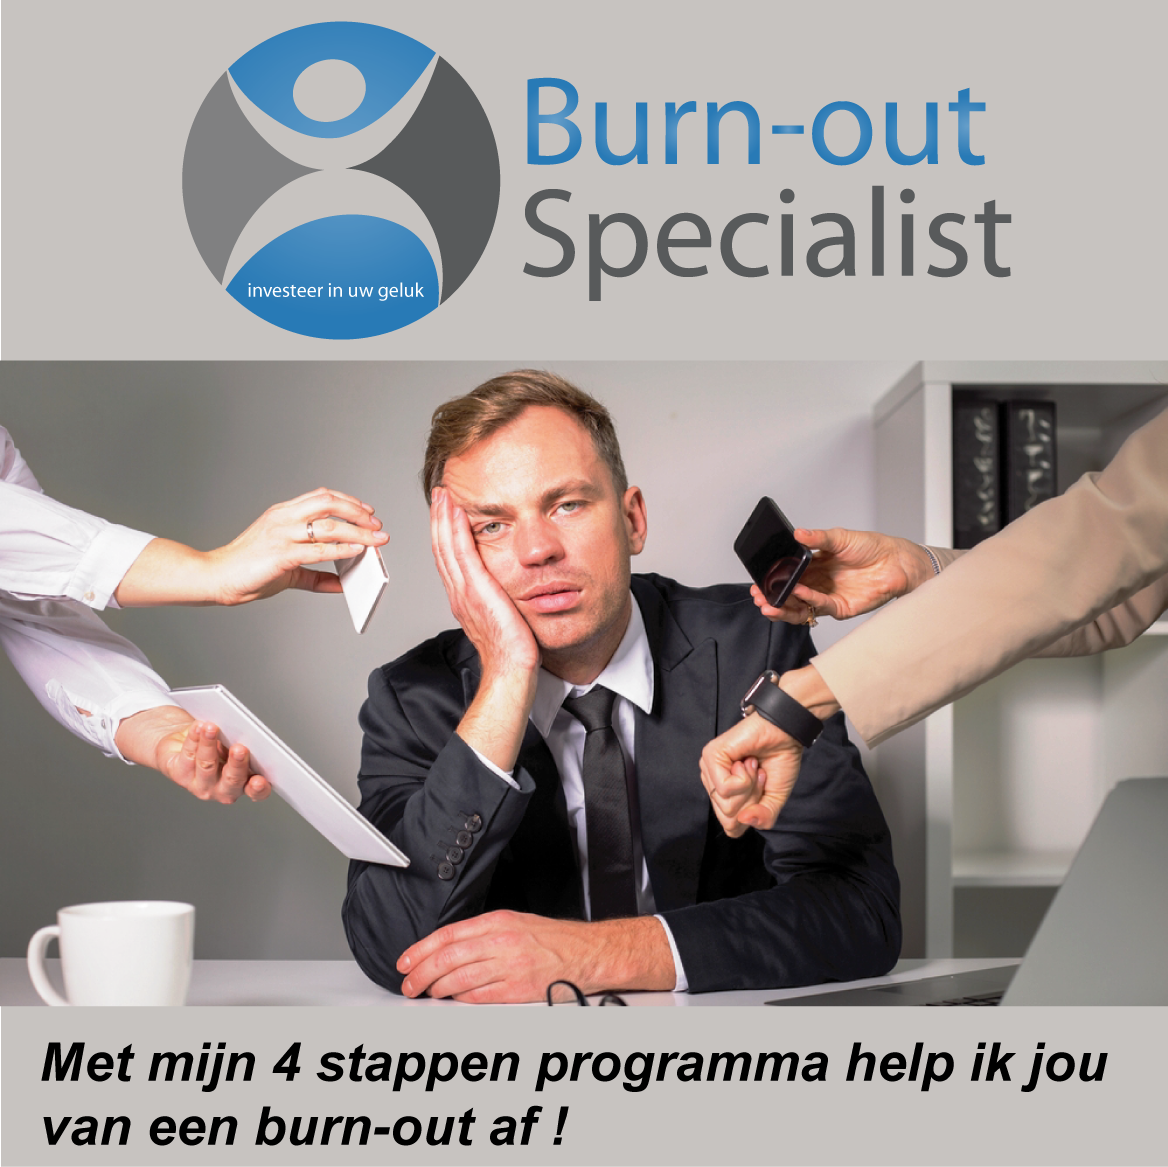 Burn-out Specialist